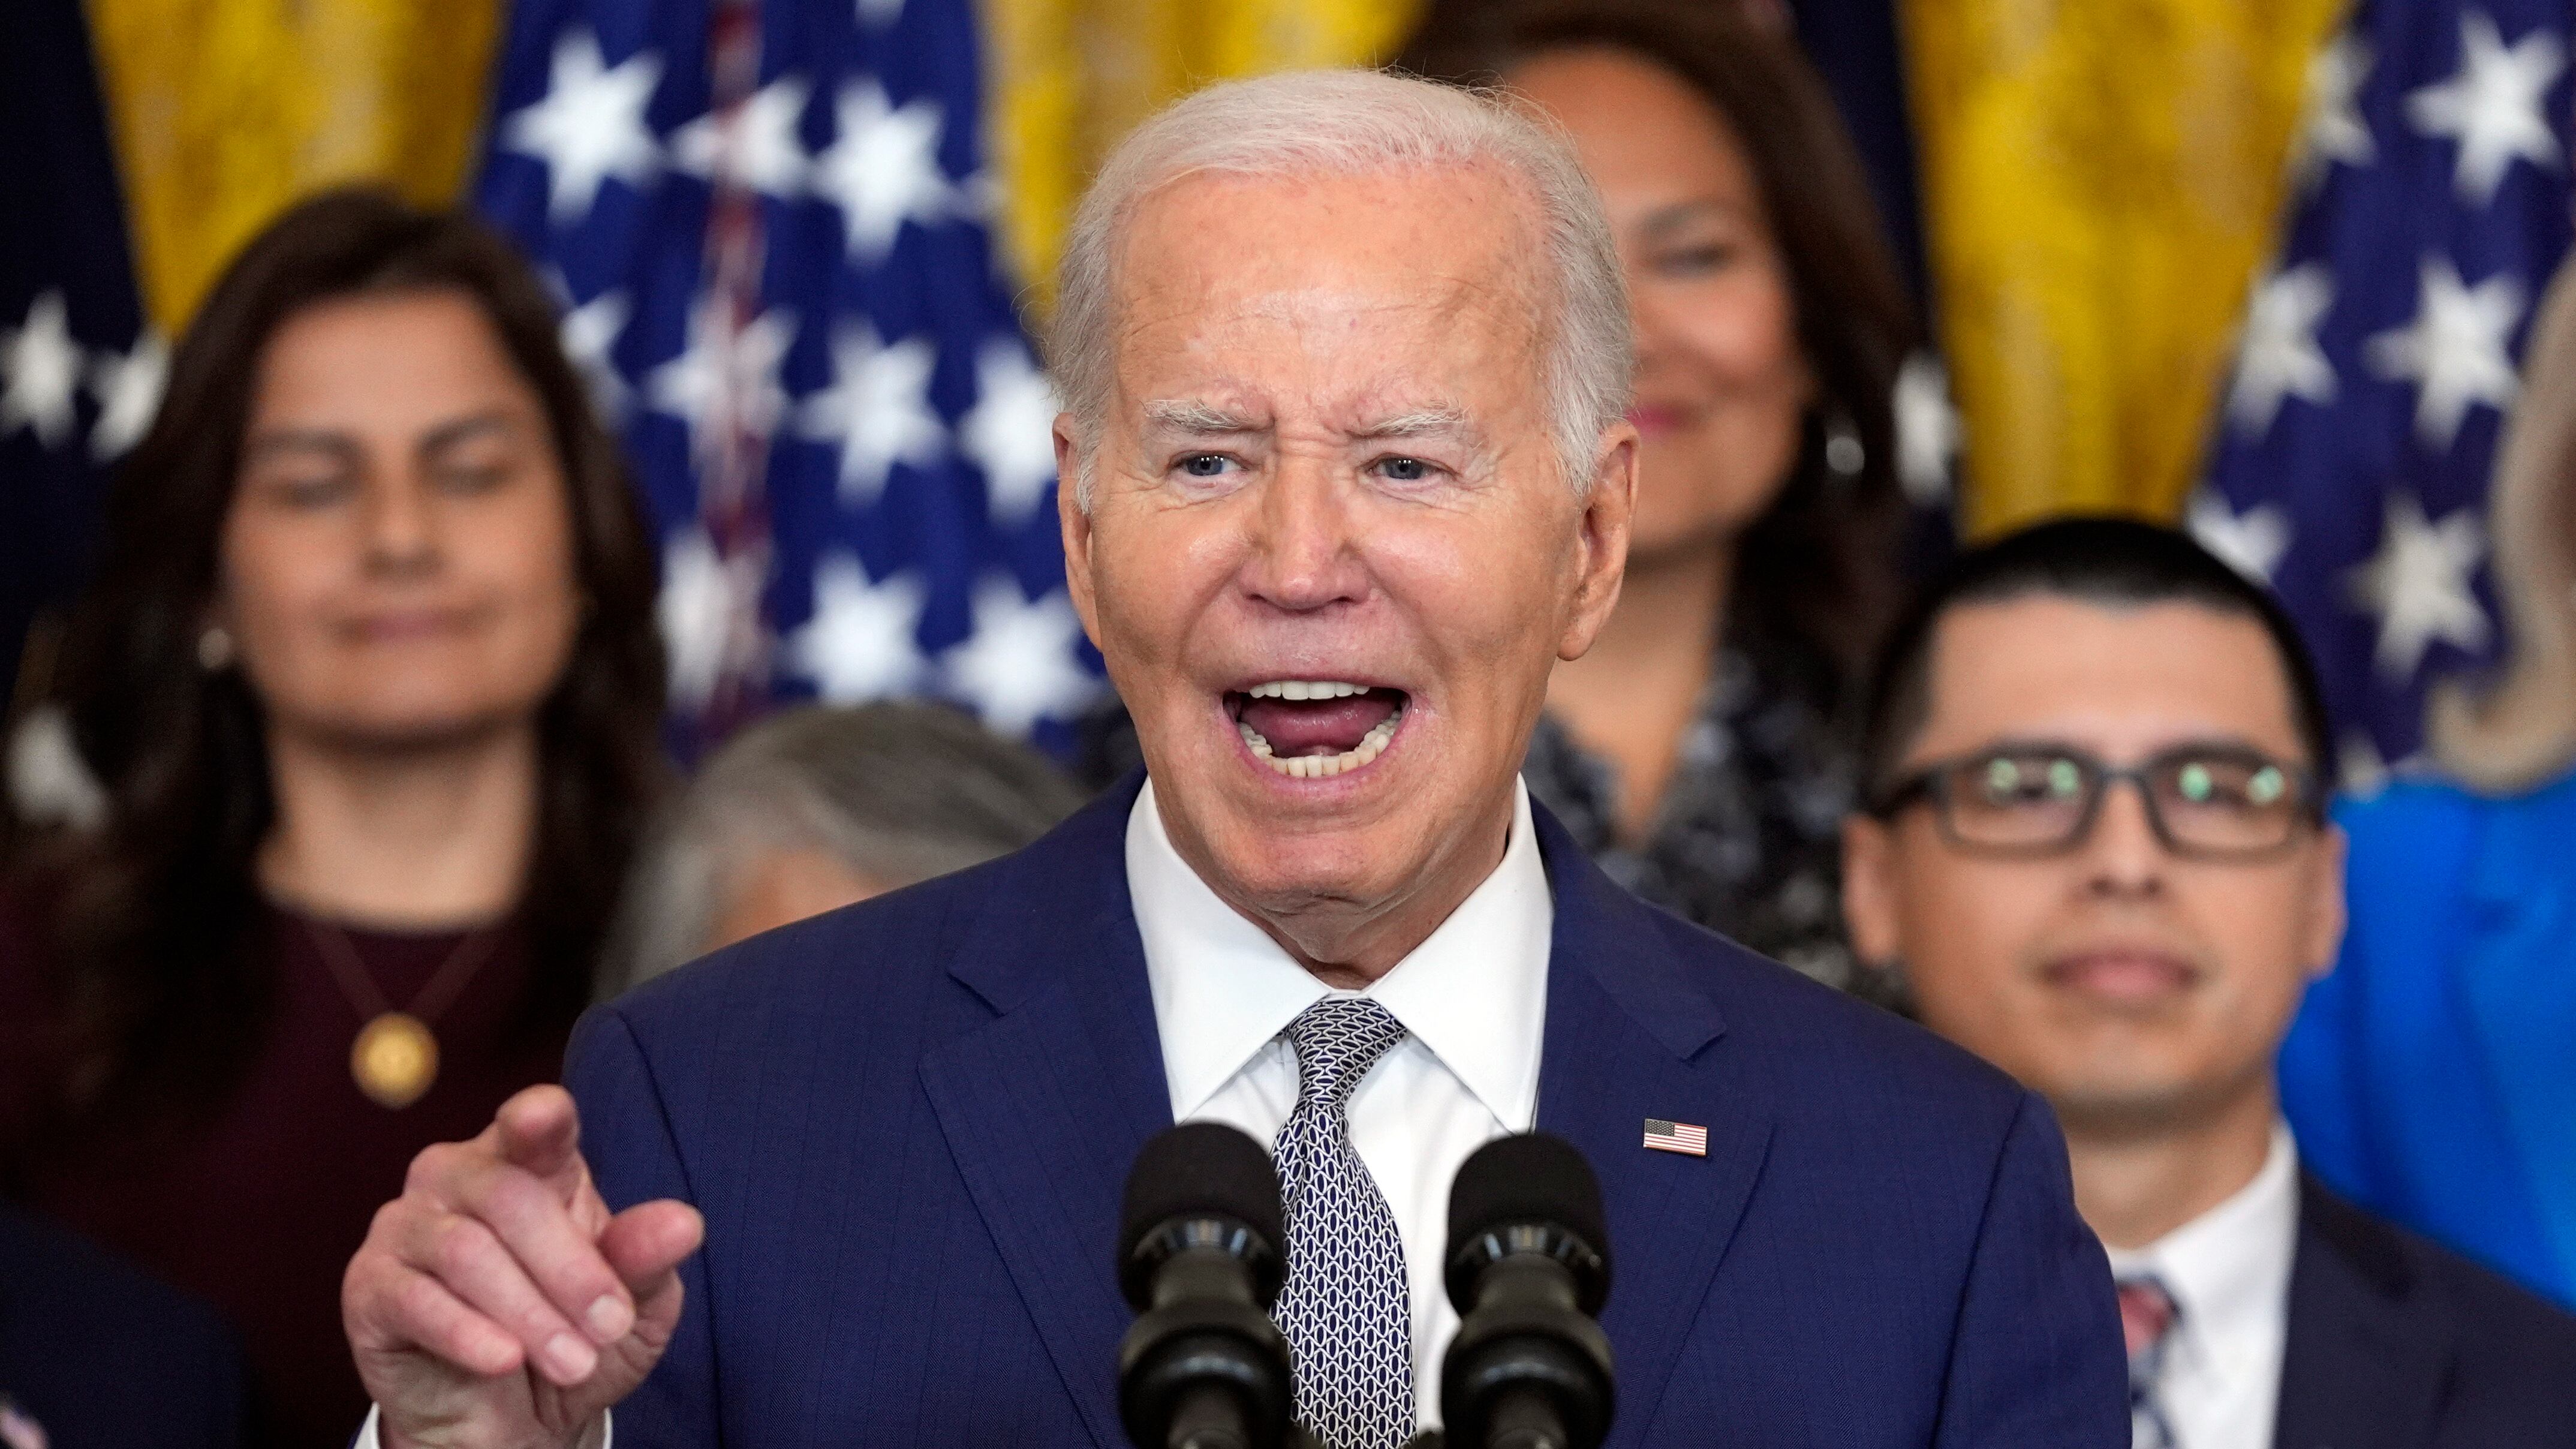 President Joe Biden is on a fundraising push ahead of this autumn’s presidential elections (AP)